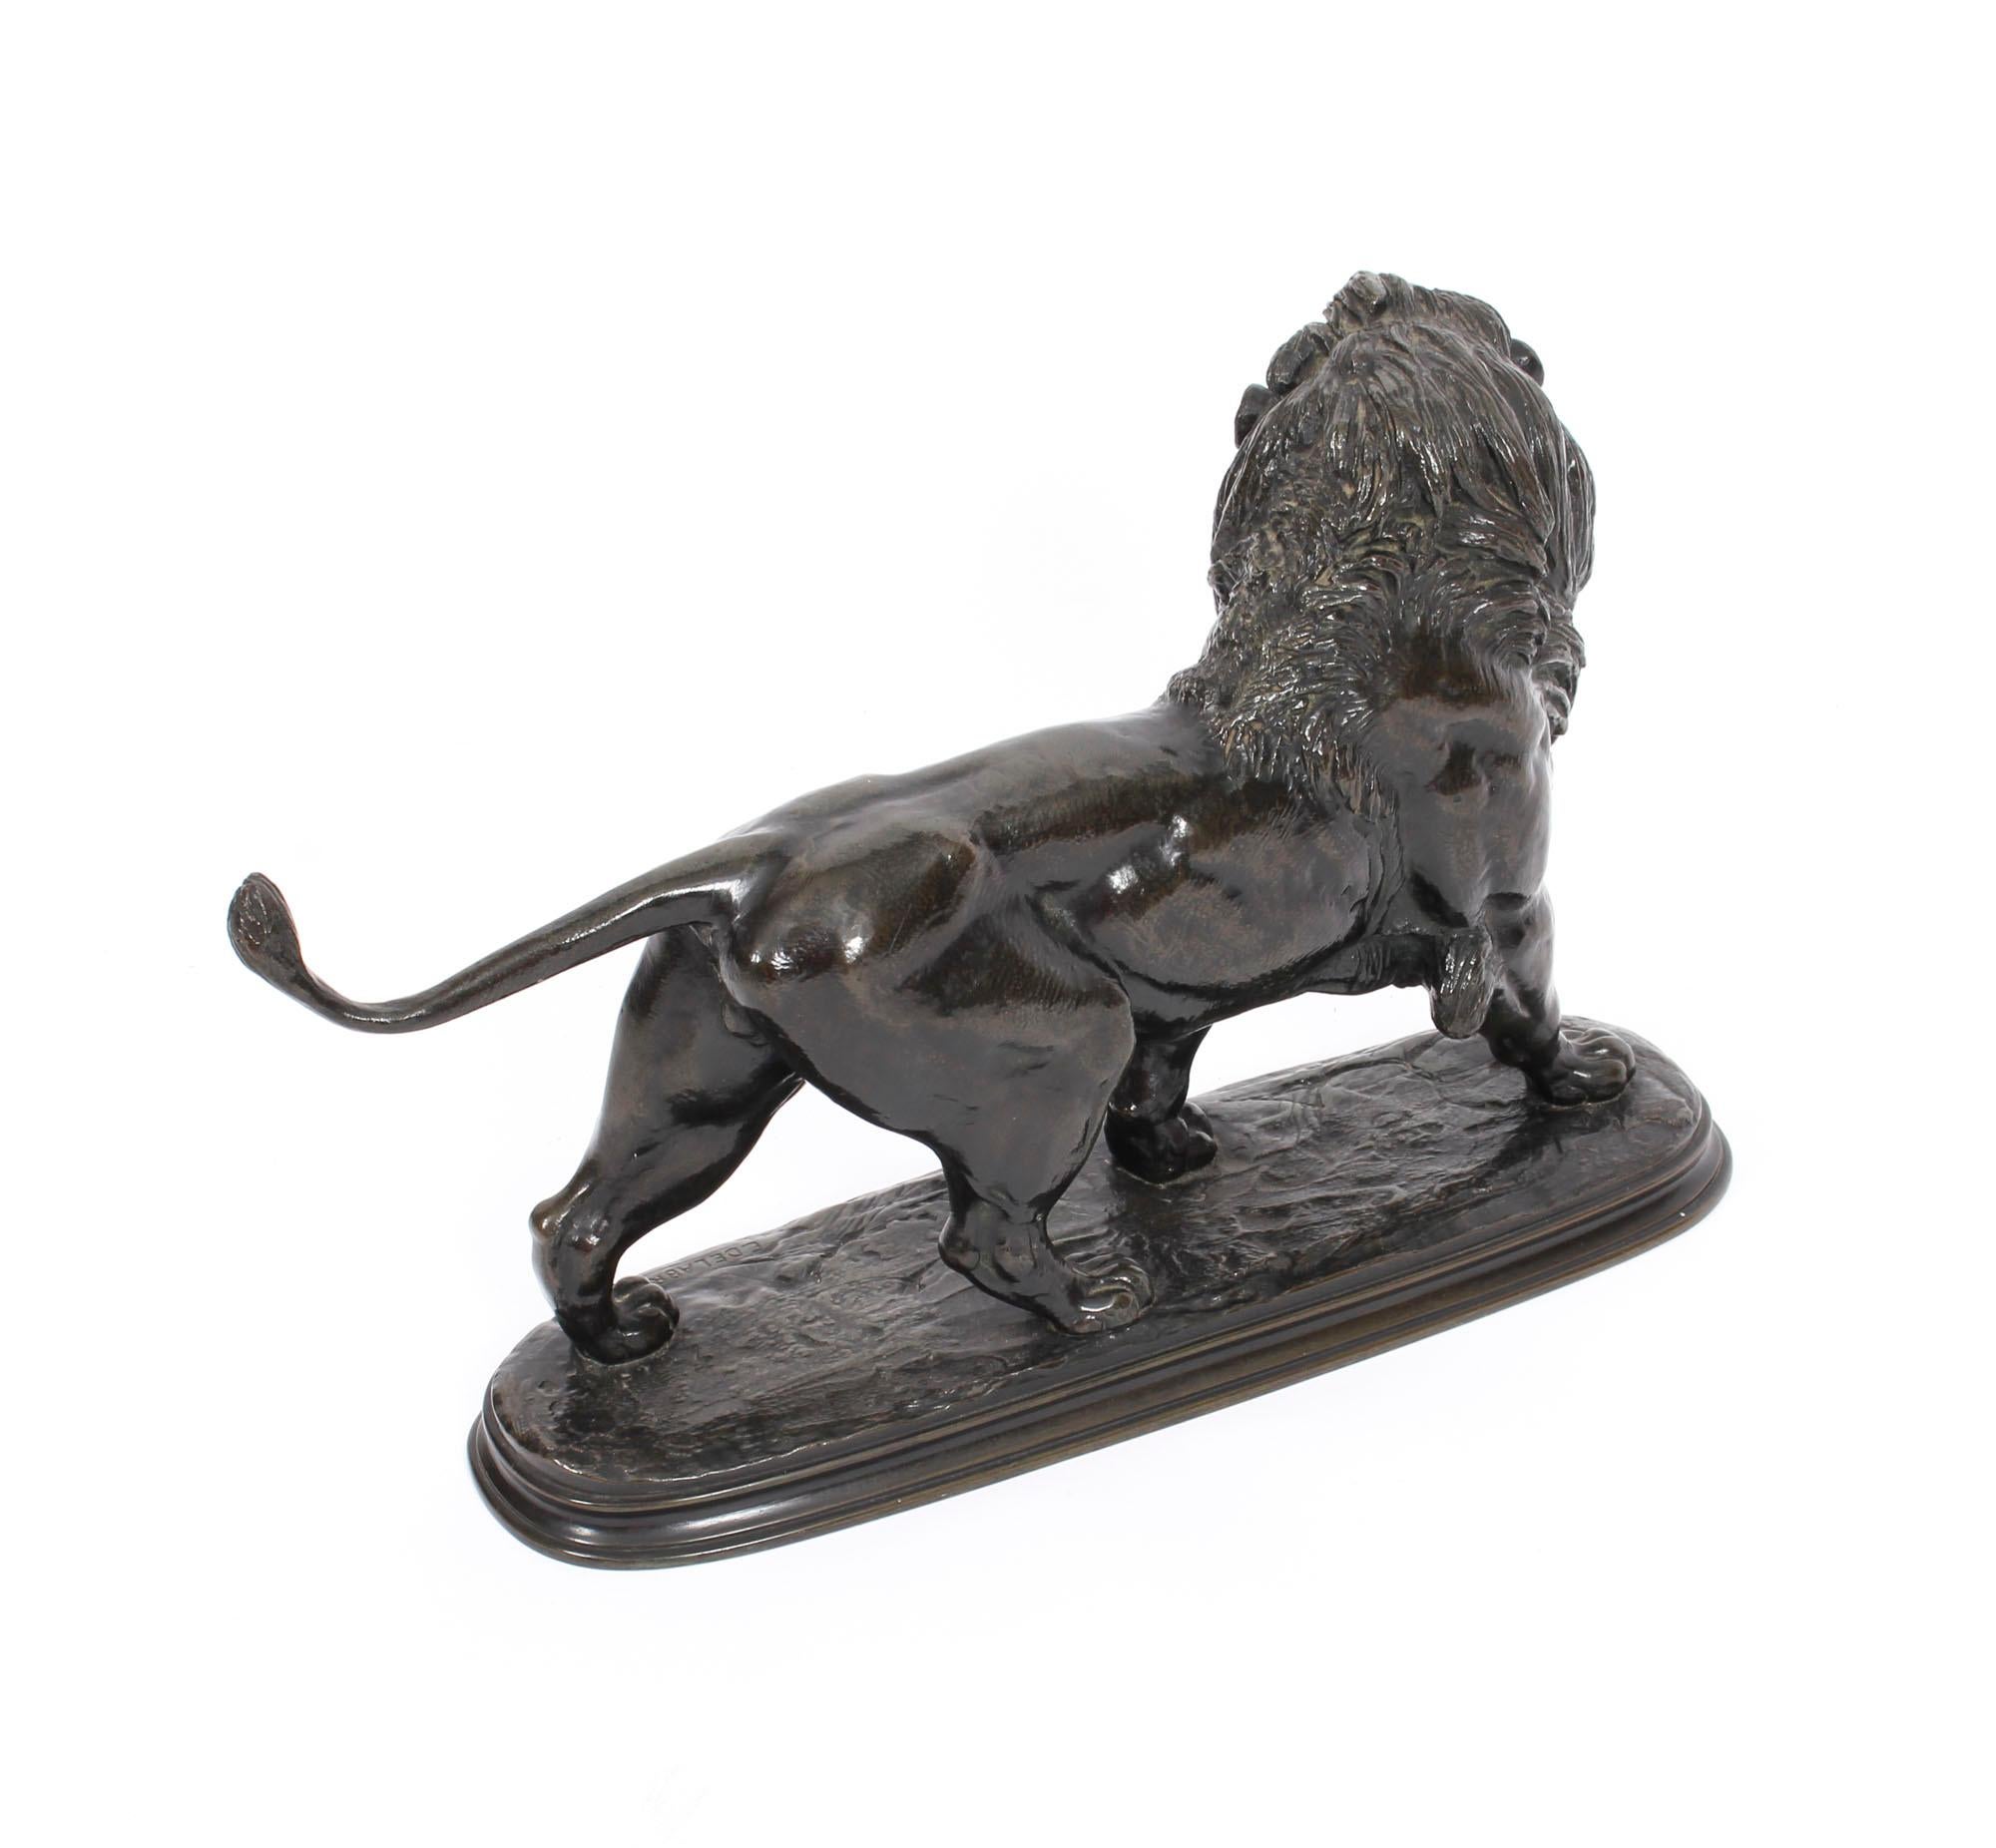 This is a truly magnificent antique French bronze sculpture of a pacing lion, by the noted French sculptor of the Animeliers school, Paul Edouard Delabrierre (1829–1912), circa 1870 in date.
 
This magnificent bronze sculpture features a striking